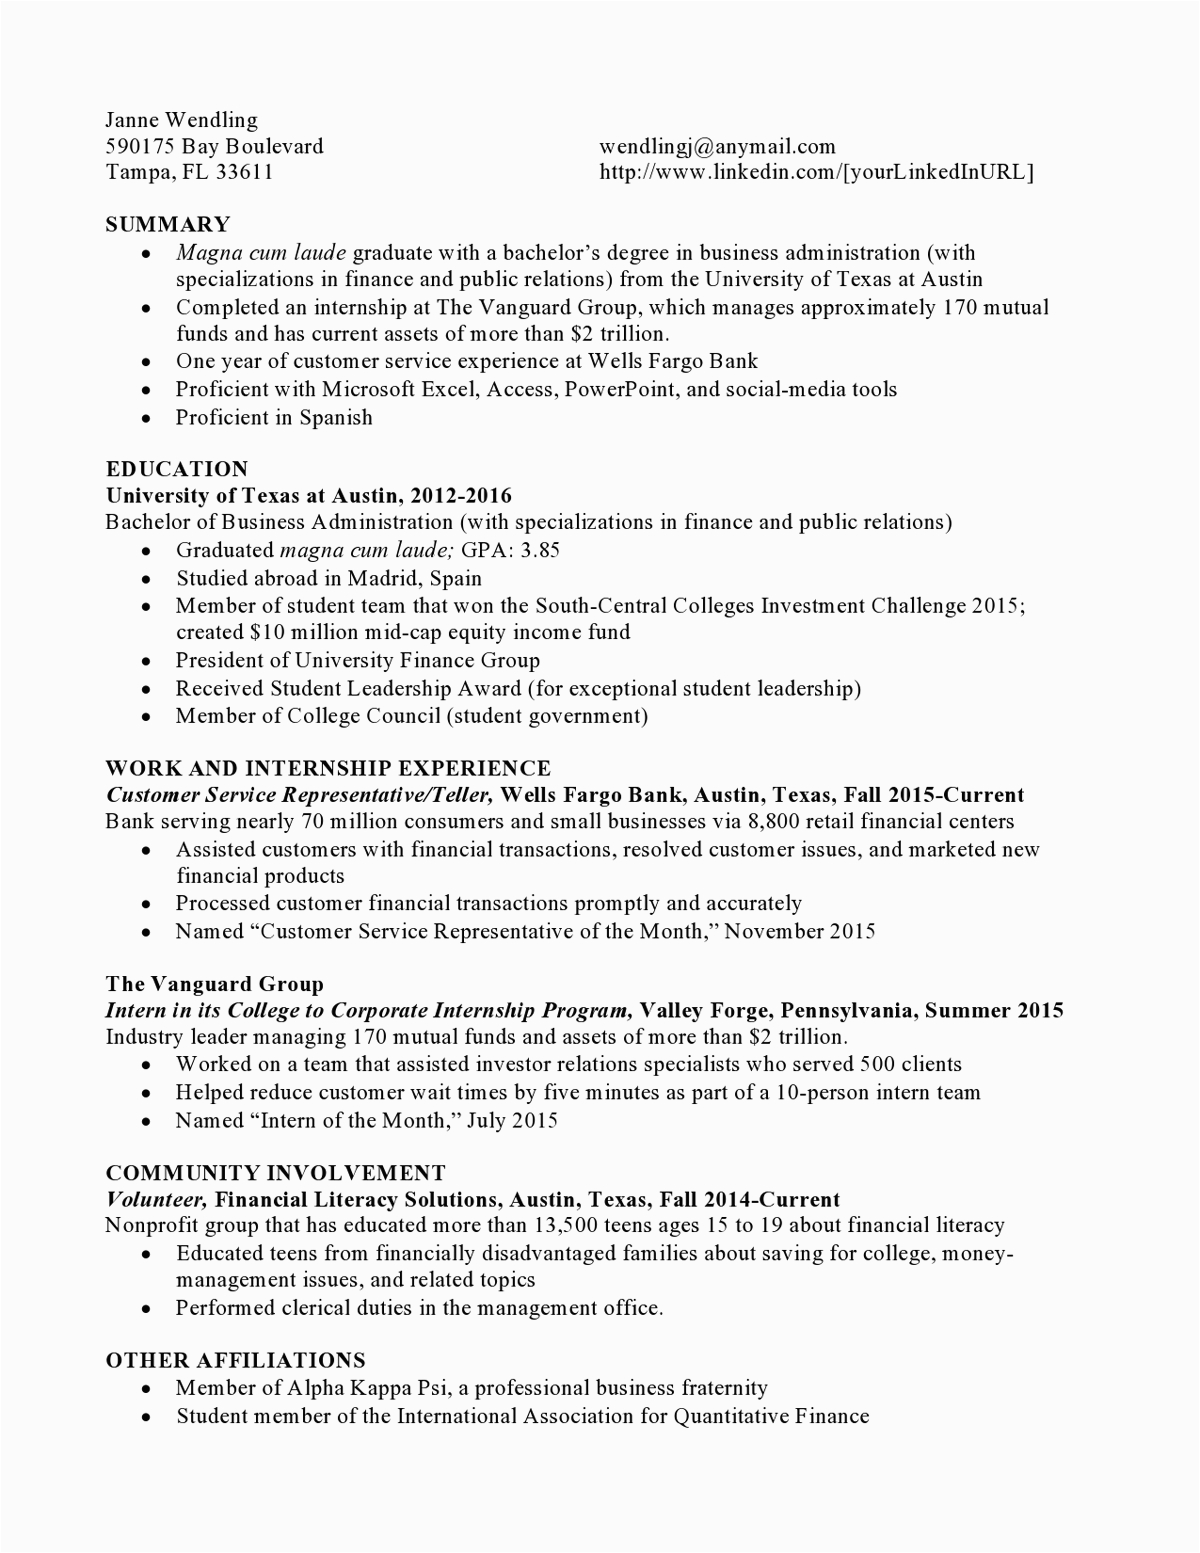 Sample Resume for Mutual Fund Sales Mutual Funds Entry Level